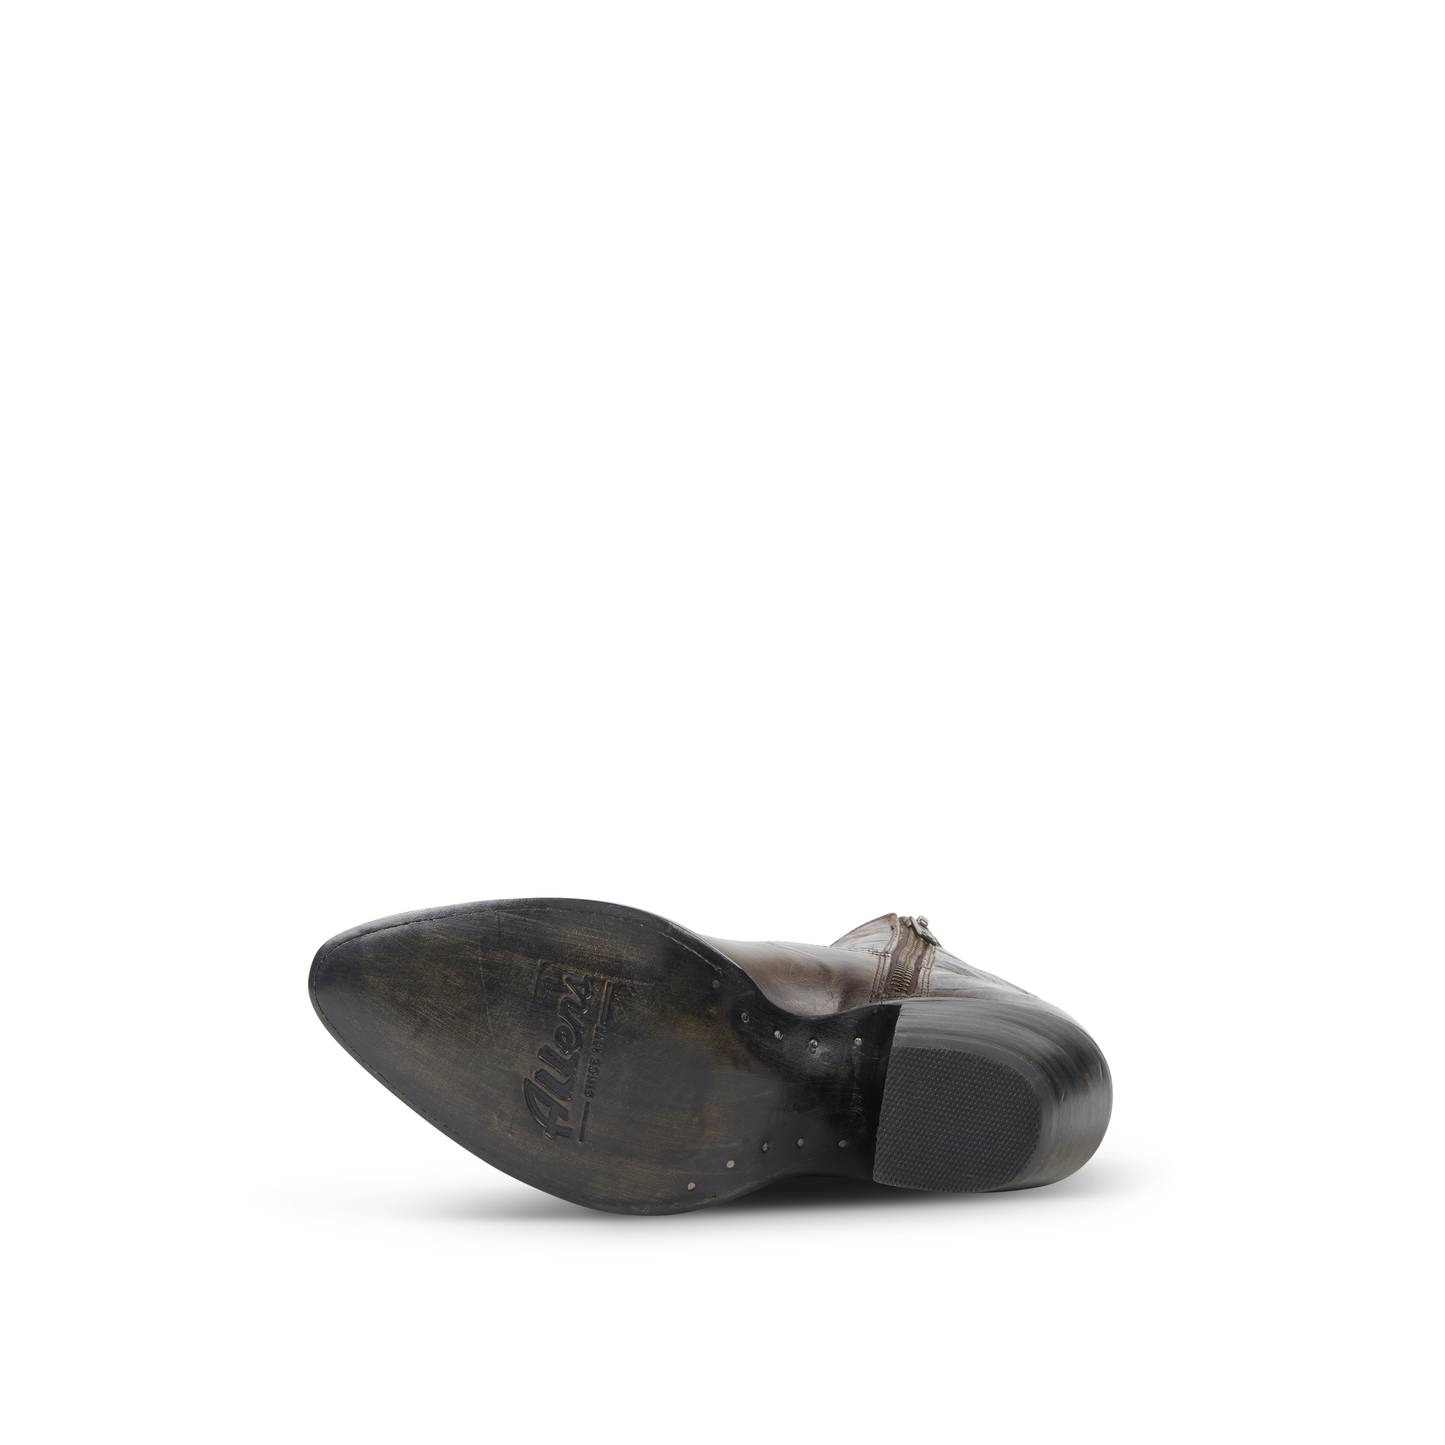 Allens Brand - Sweetheart - Almond Toe - Anthracite